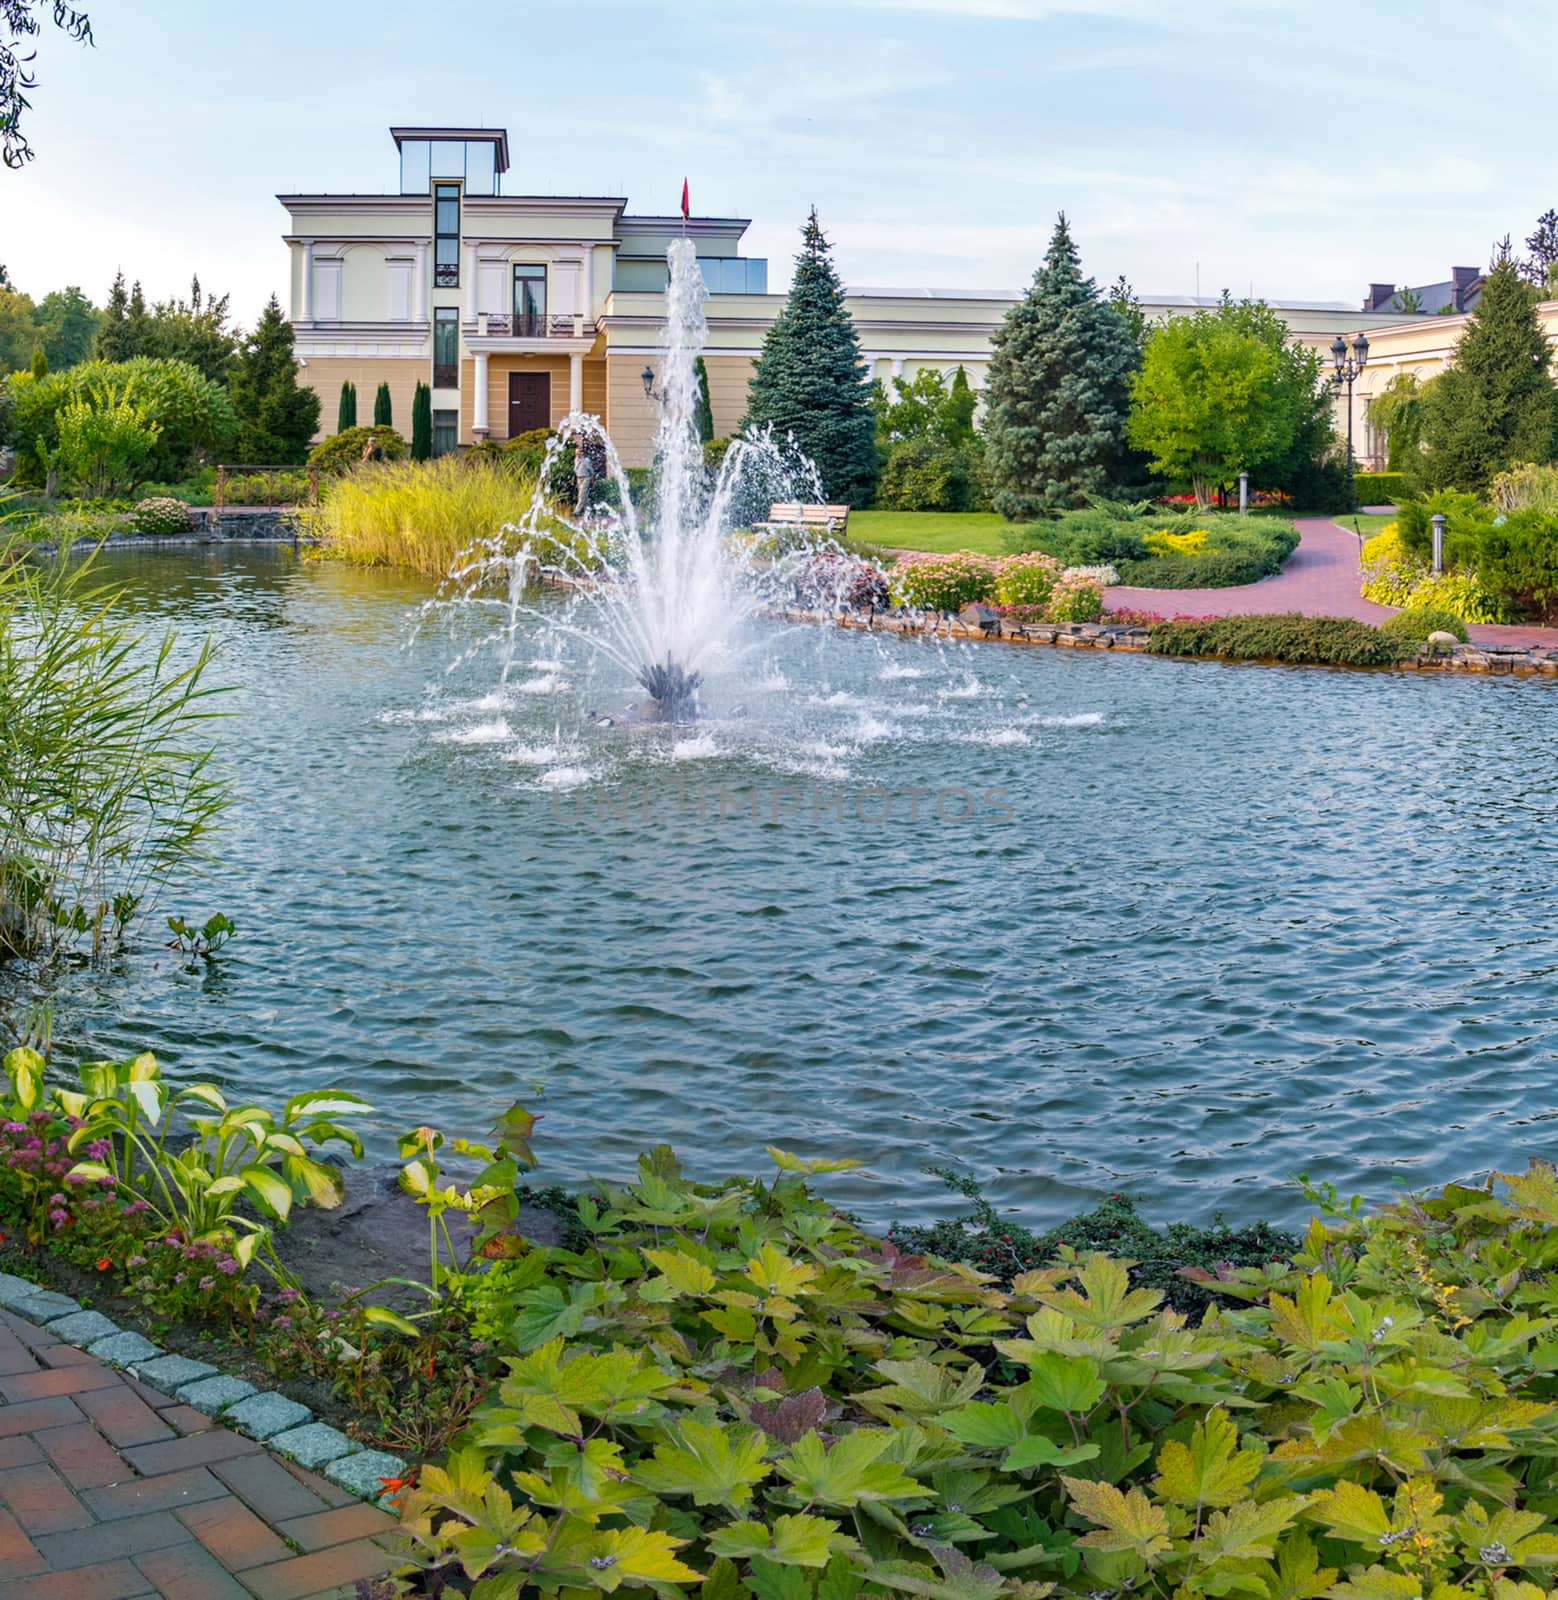 A lovely view of the pond water with a slight ripple on the surface with a fountain in the middle with greenery growing around and a building with a flag standing in the distance.